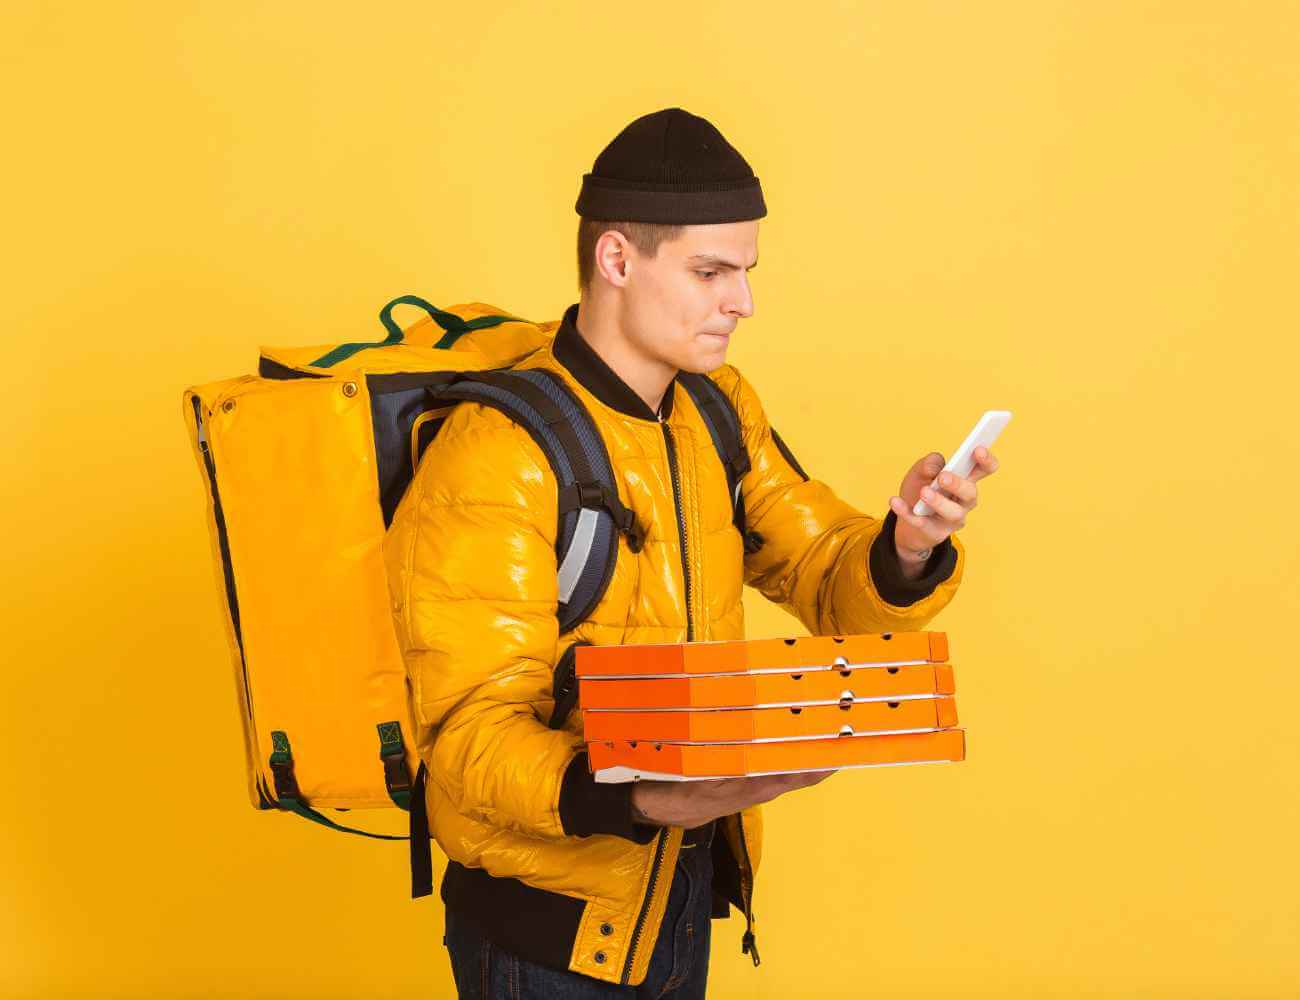 21 Best Delivery Apps To Work For ($300/Day Income)